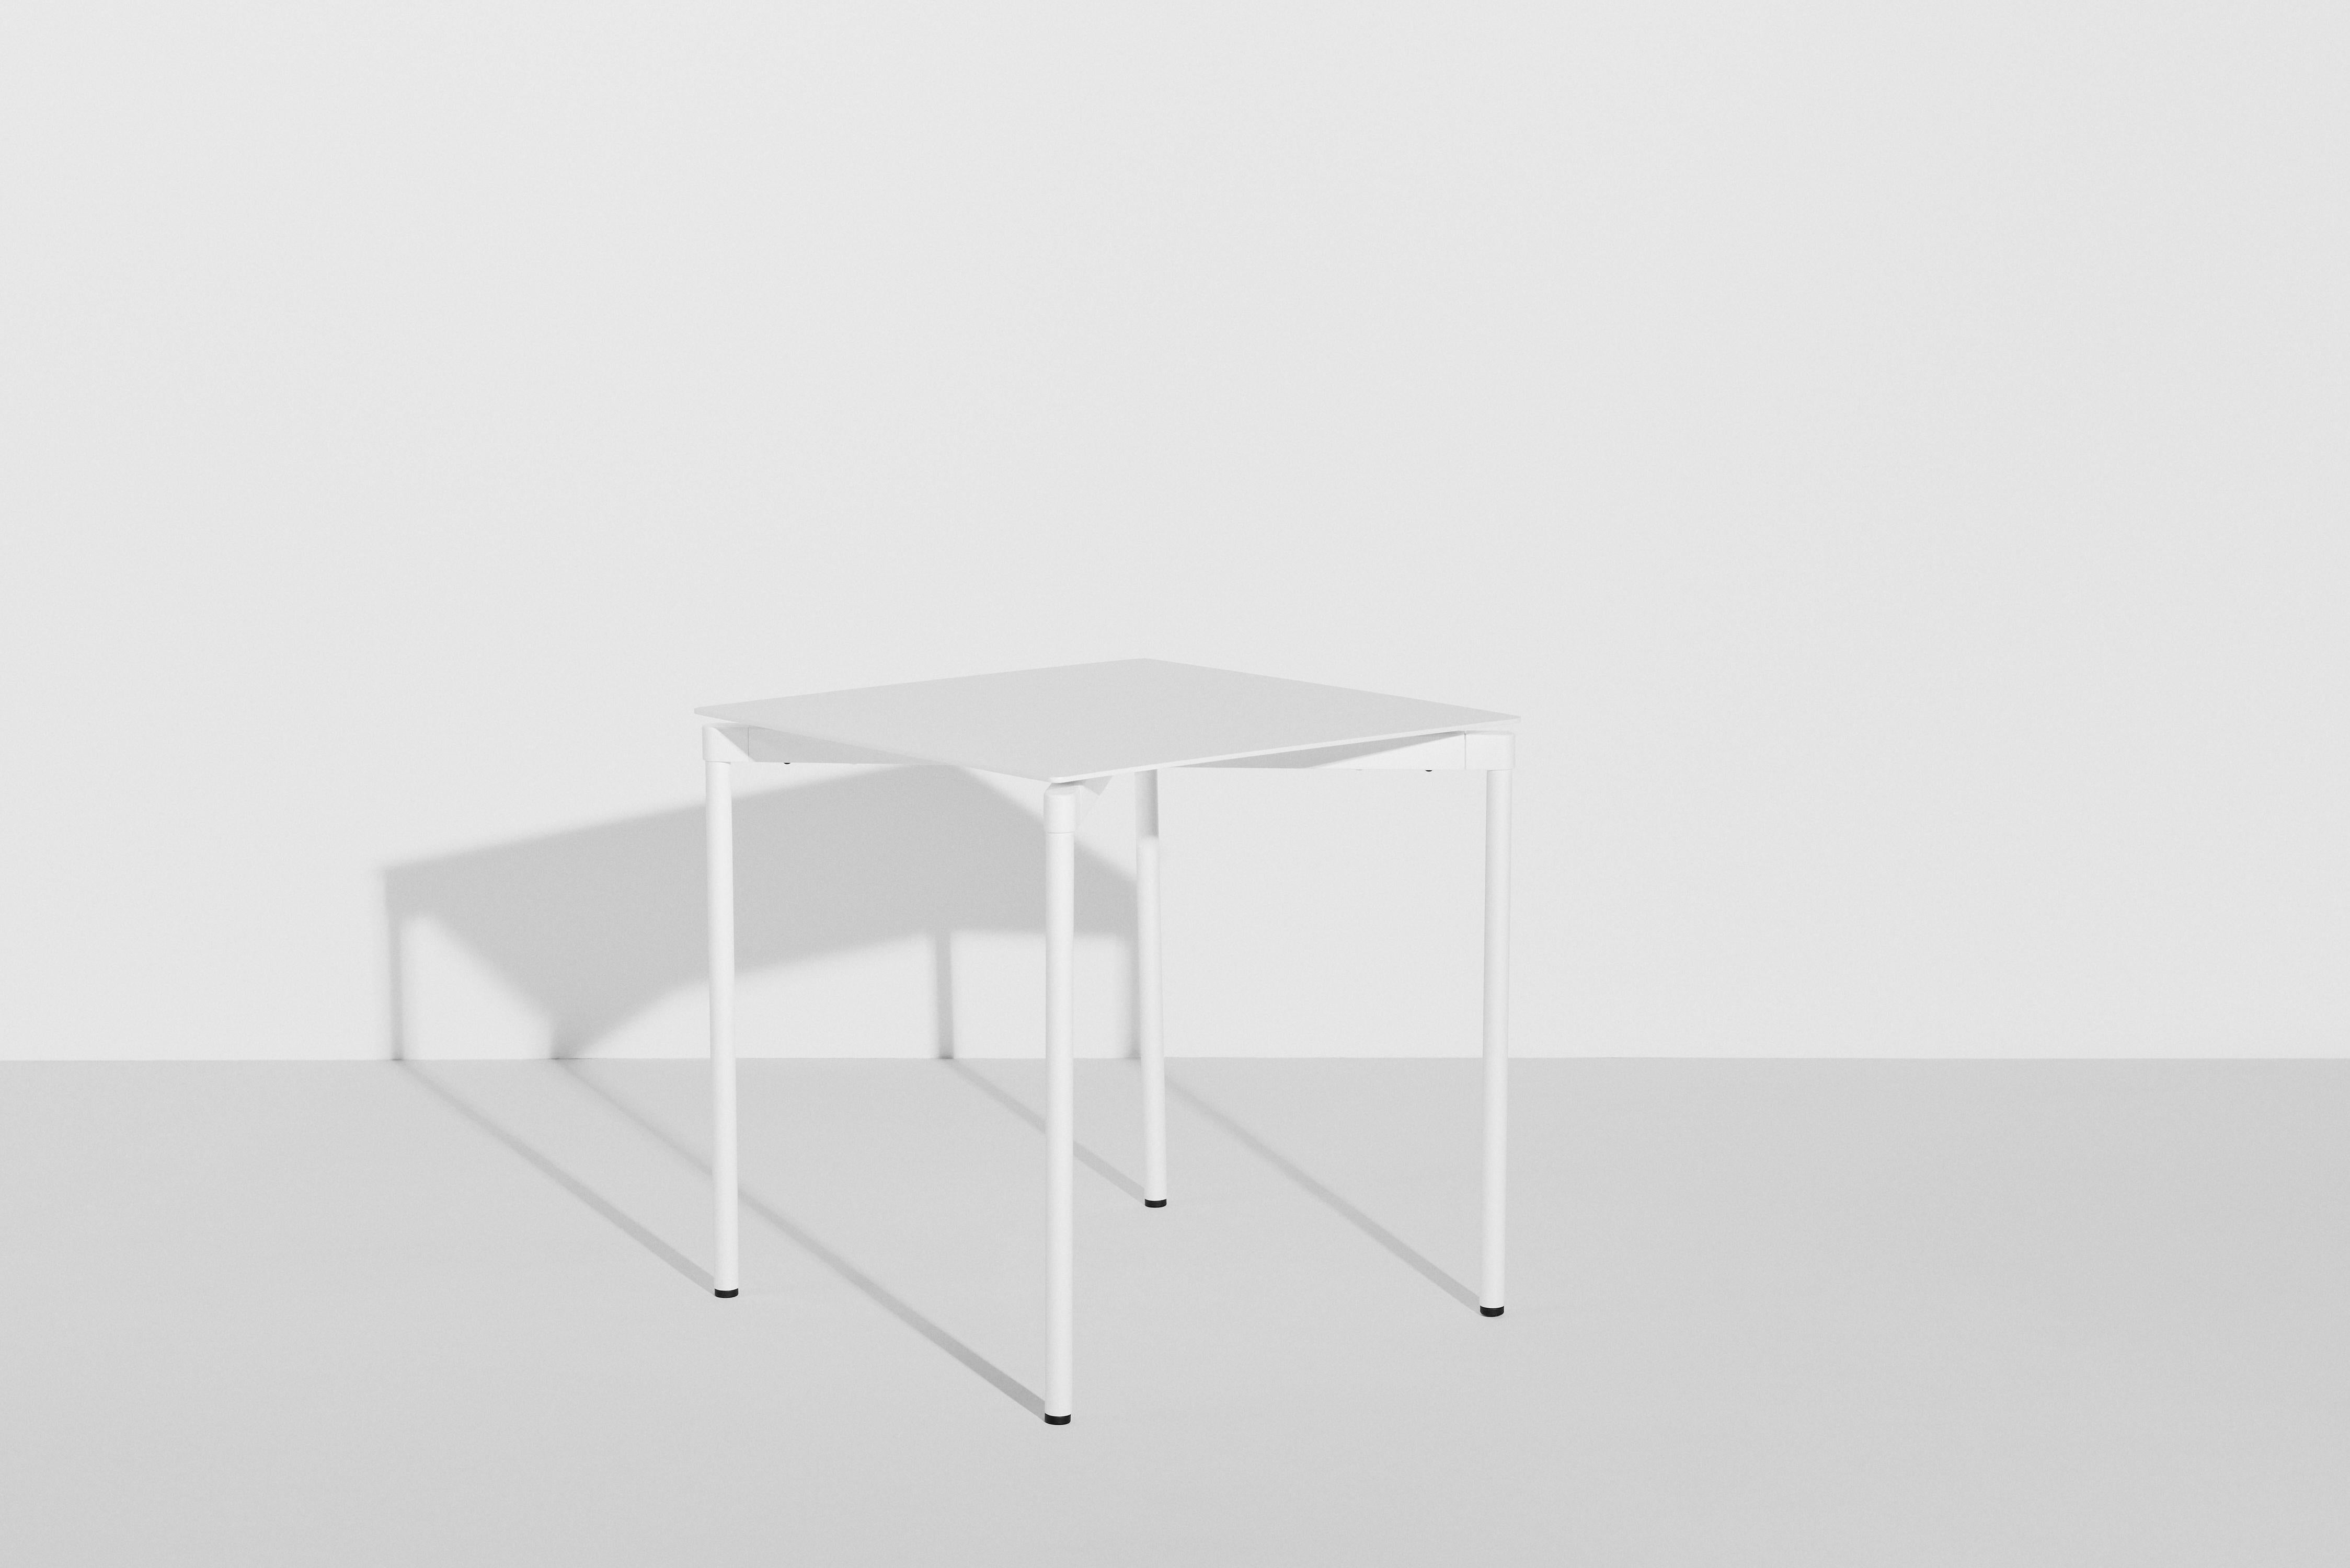 Chinese Petite Friture Fromme Square Table in White Aluminium by Tom Chung For Sale